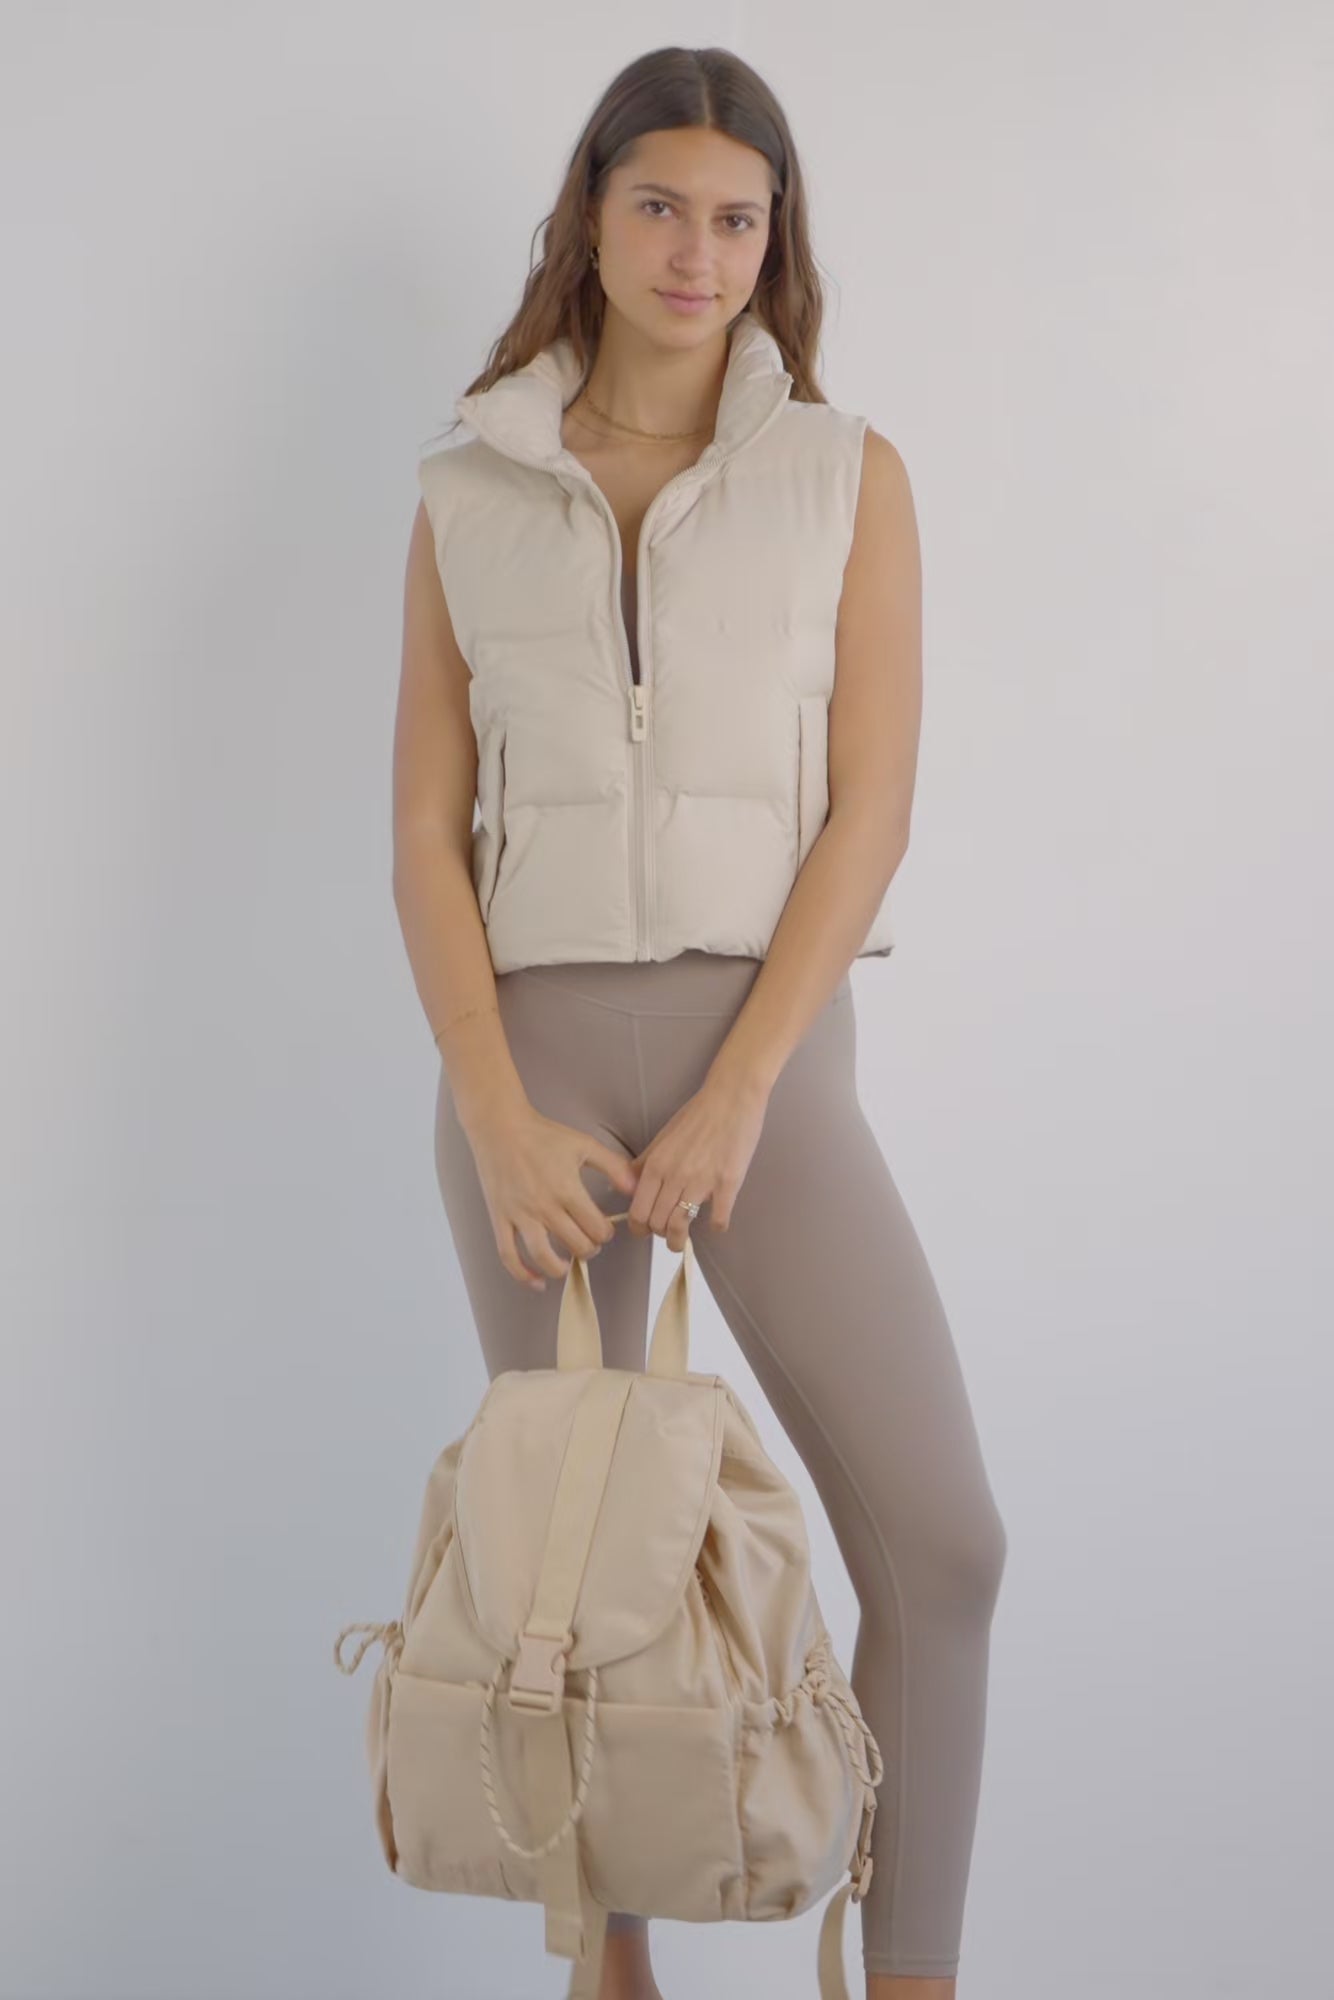 Backpack - Beige in Tennis Sport The Inspired Backpack Chic